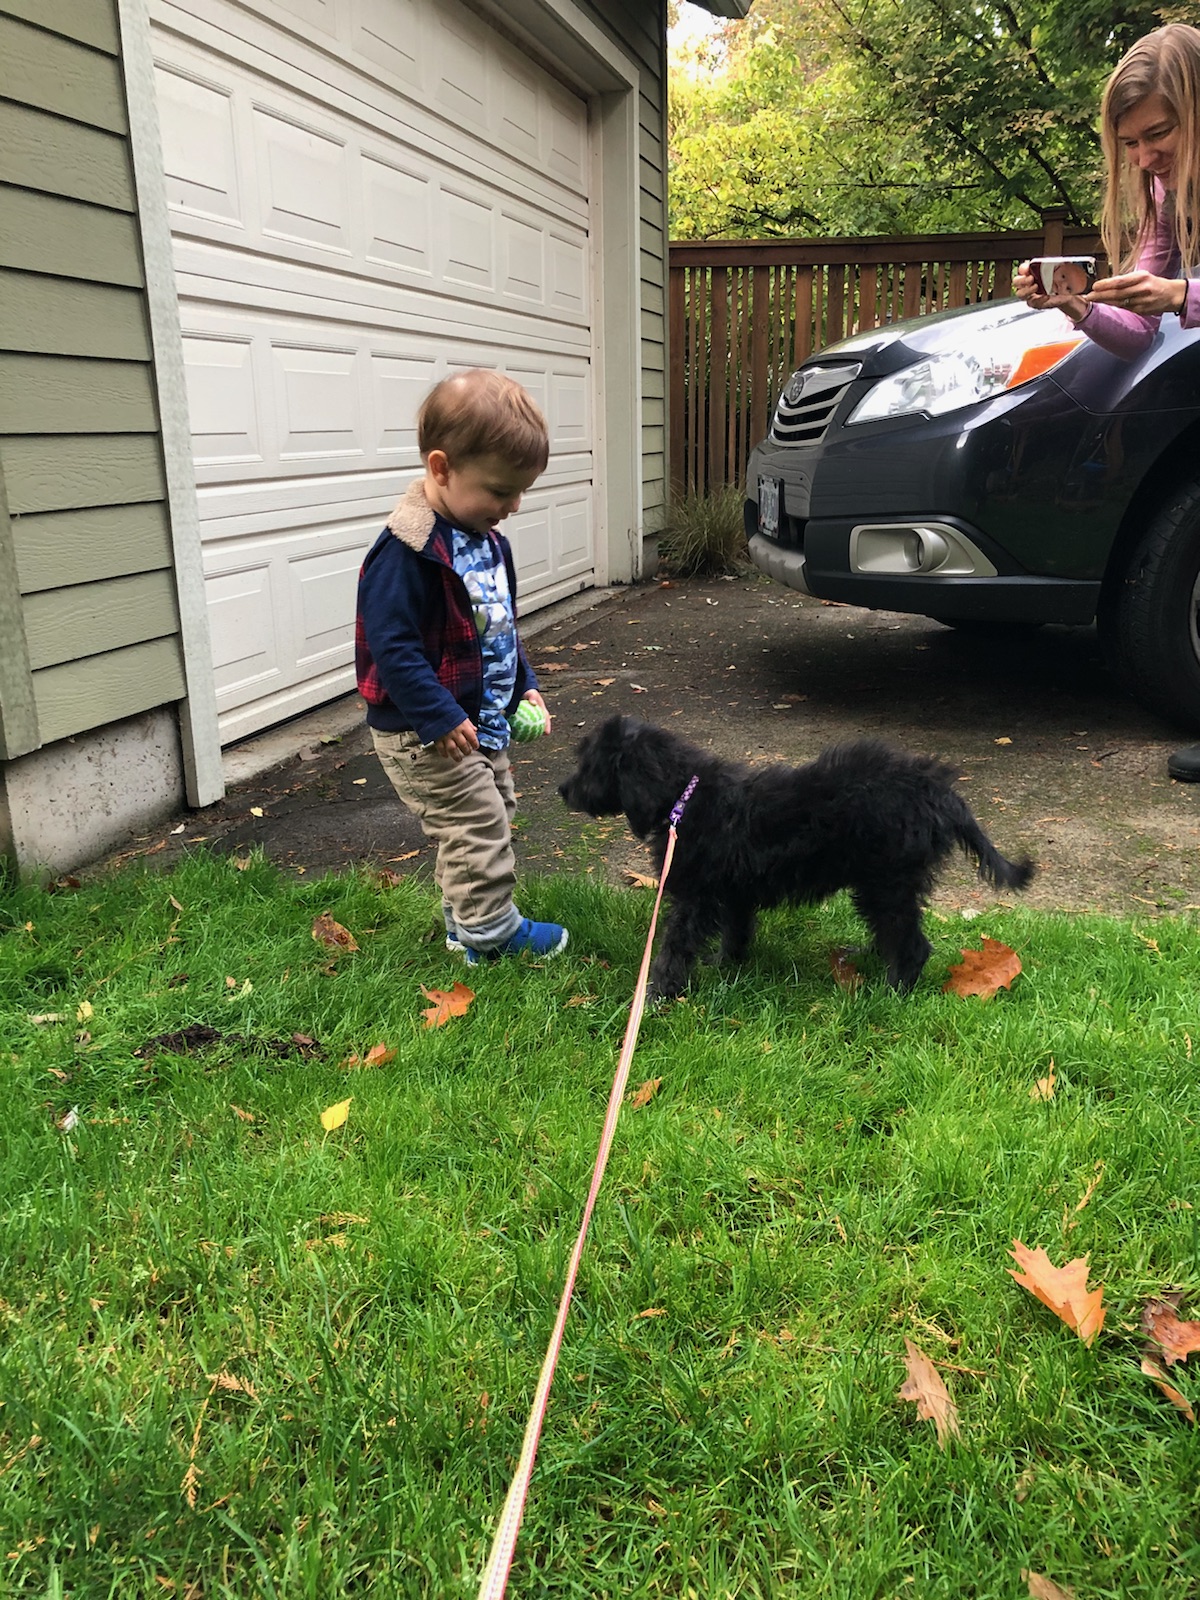 POTTY TRAINING AN AUSSIEDOODLE PUPPY - 7 DAY CRATE TRAINING SCHEDULE- BLACK MULTIGEN LABRADOODLE PUPPY ON A LEASH